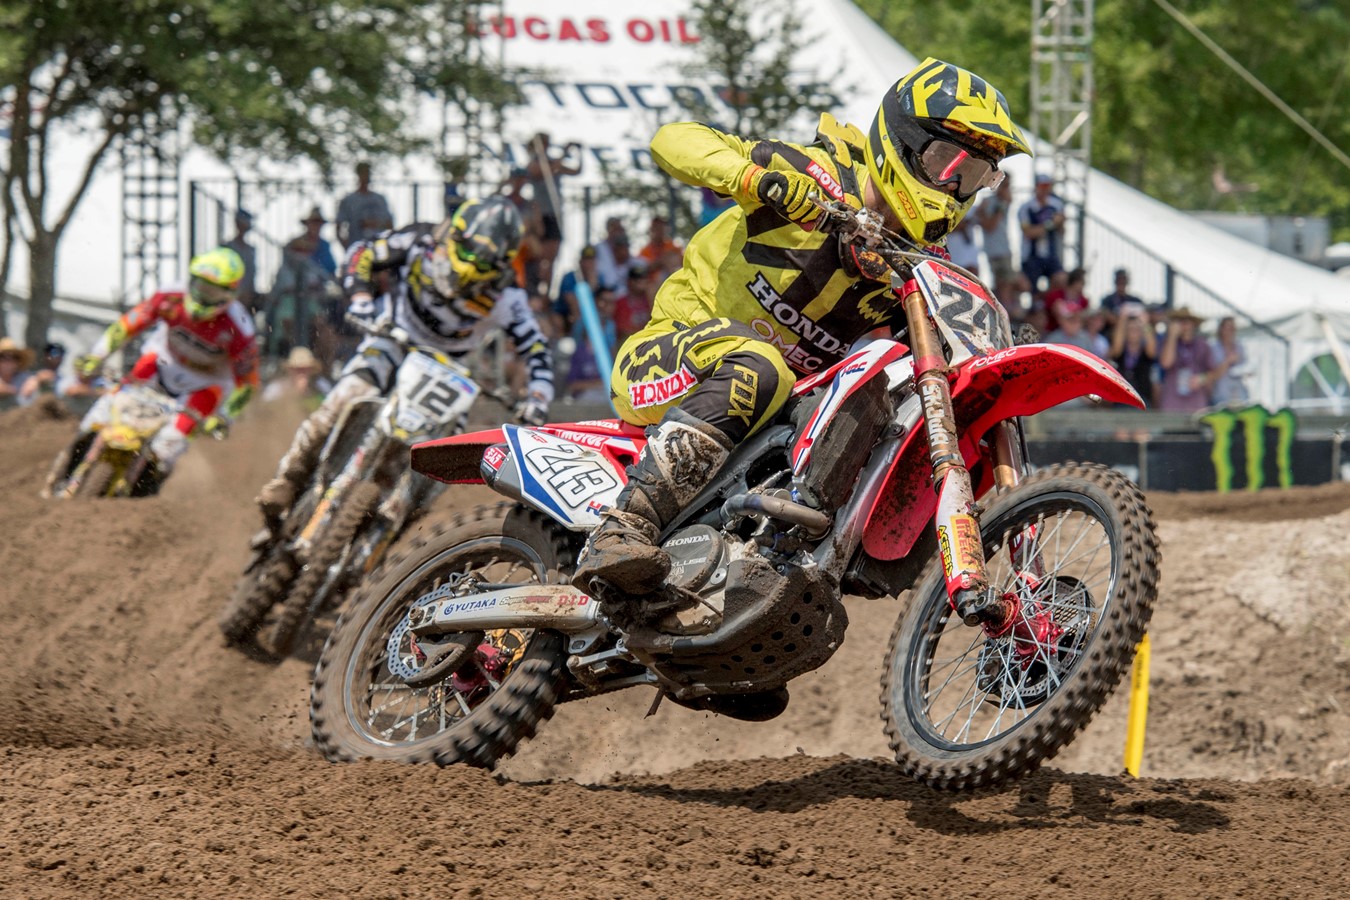 Fourth place finish for Gajser in USA GP